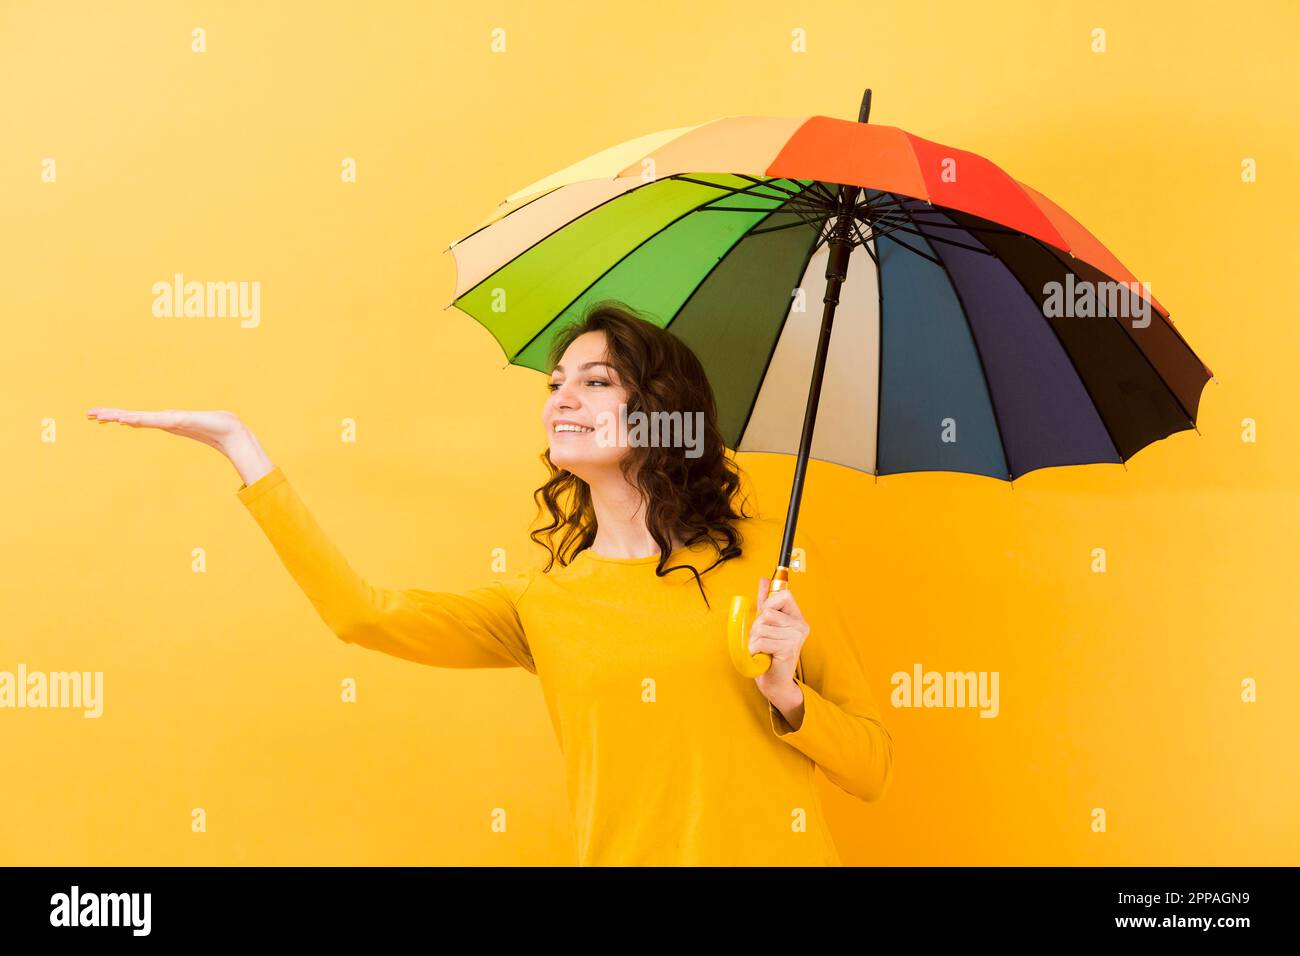 Front view woman with rainbow umbrella Stock Photo